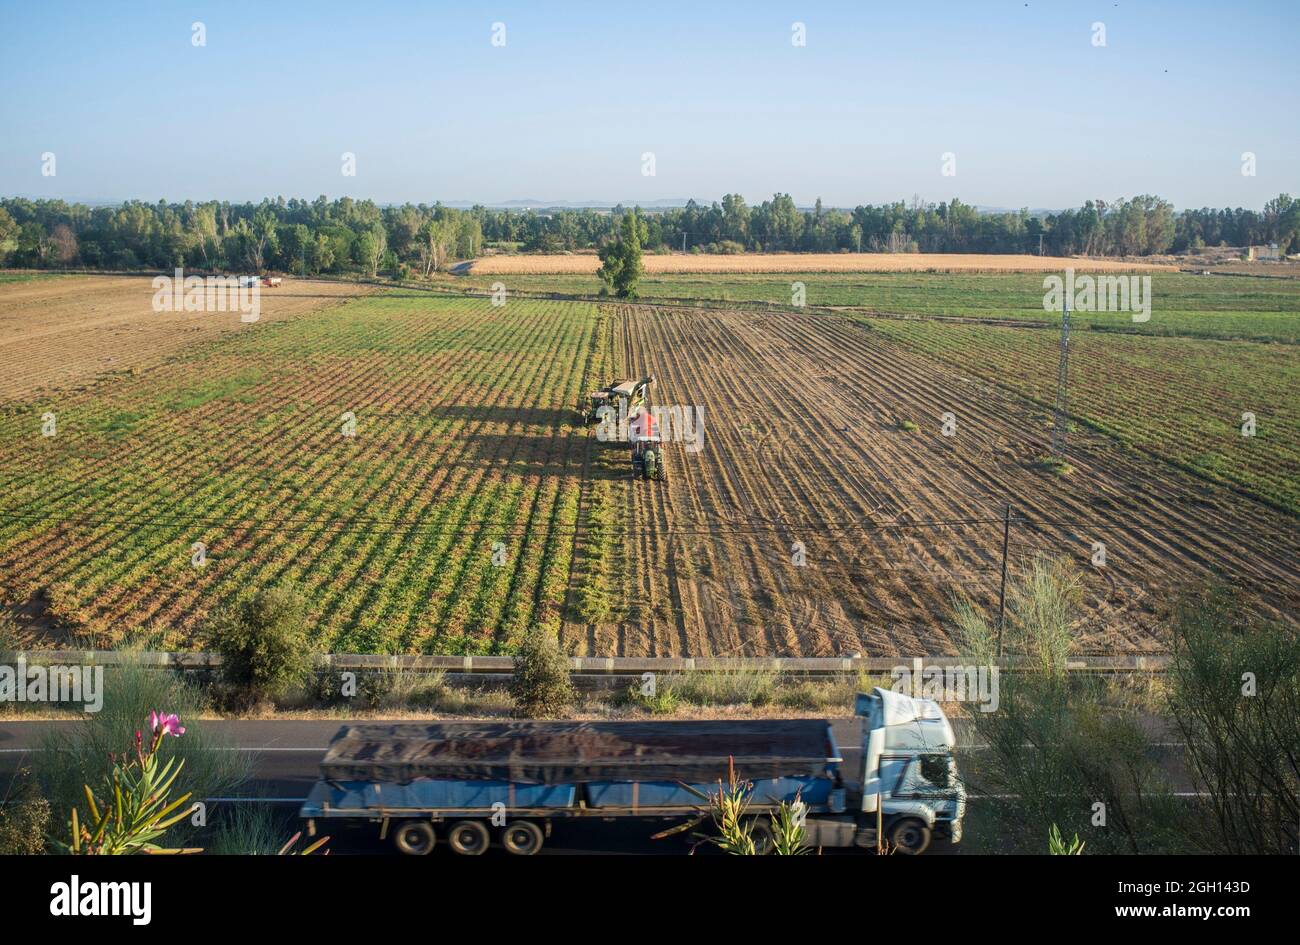 Tomato harvesting works aerial view. Load tomato truck crossing beside. Stock Photo